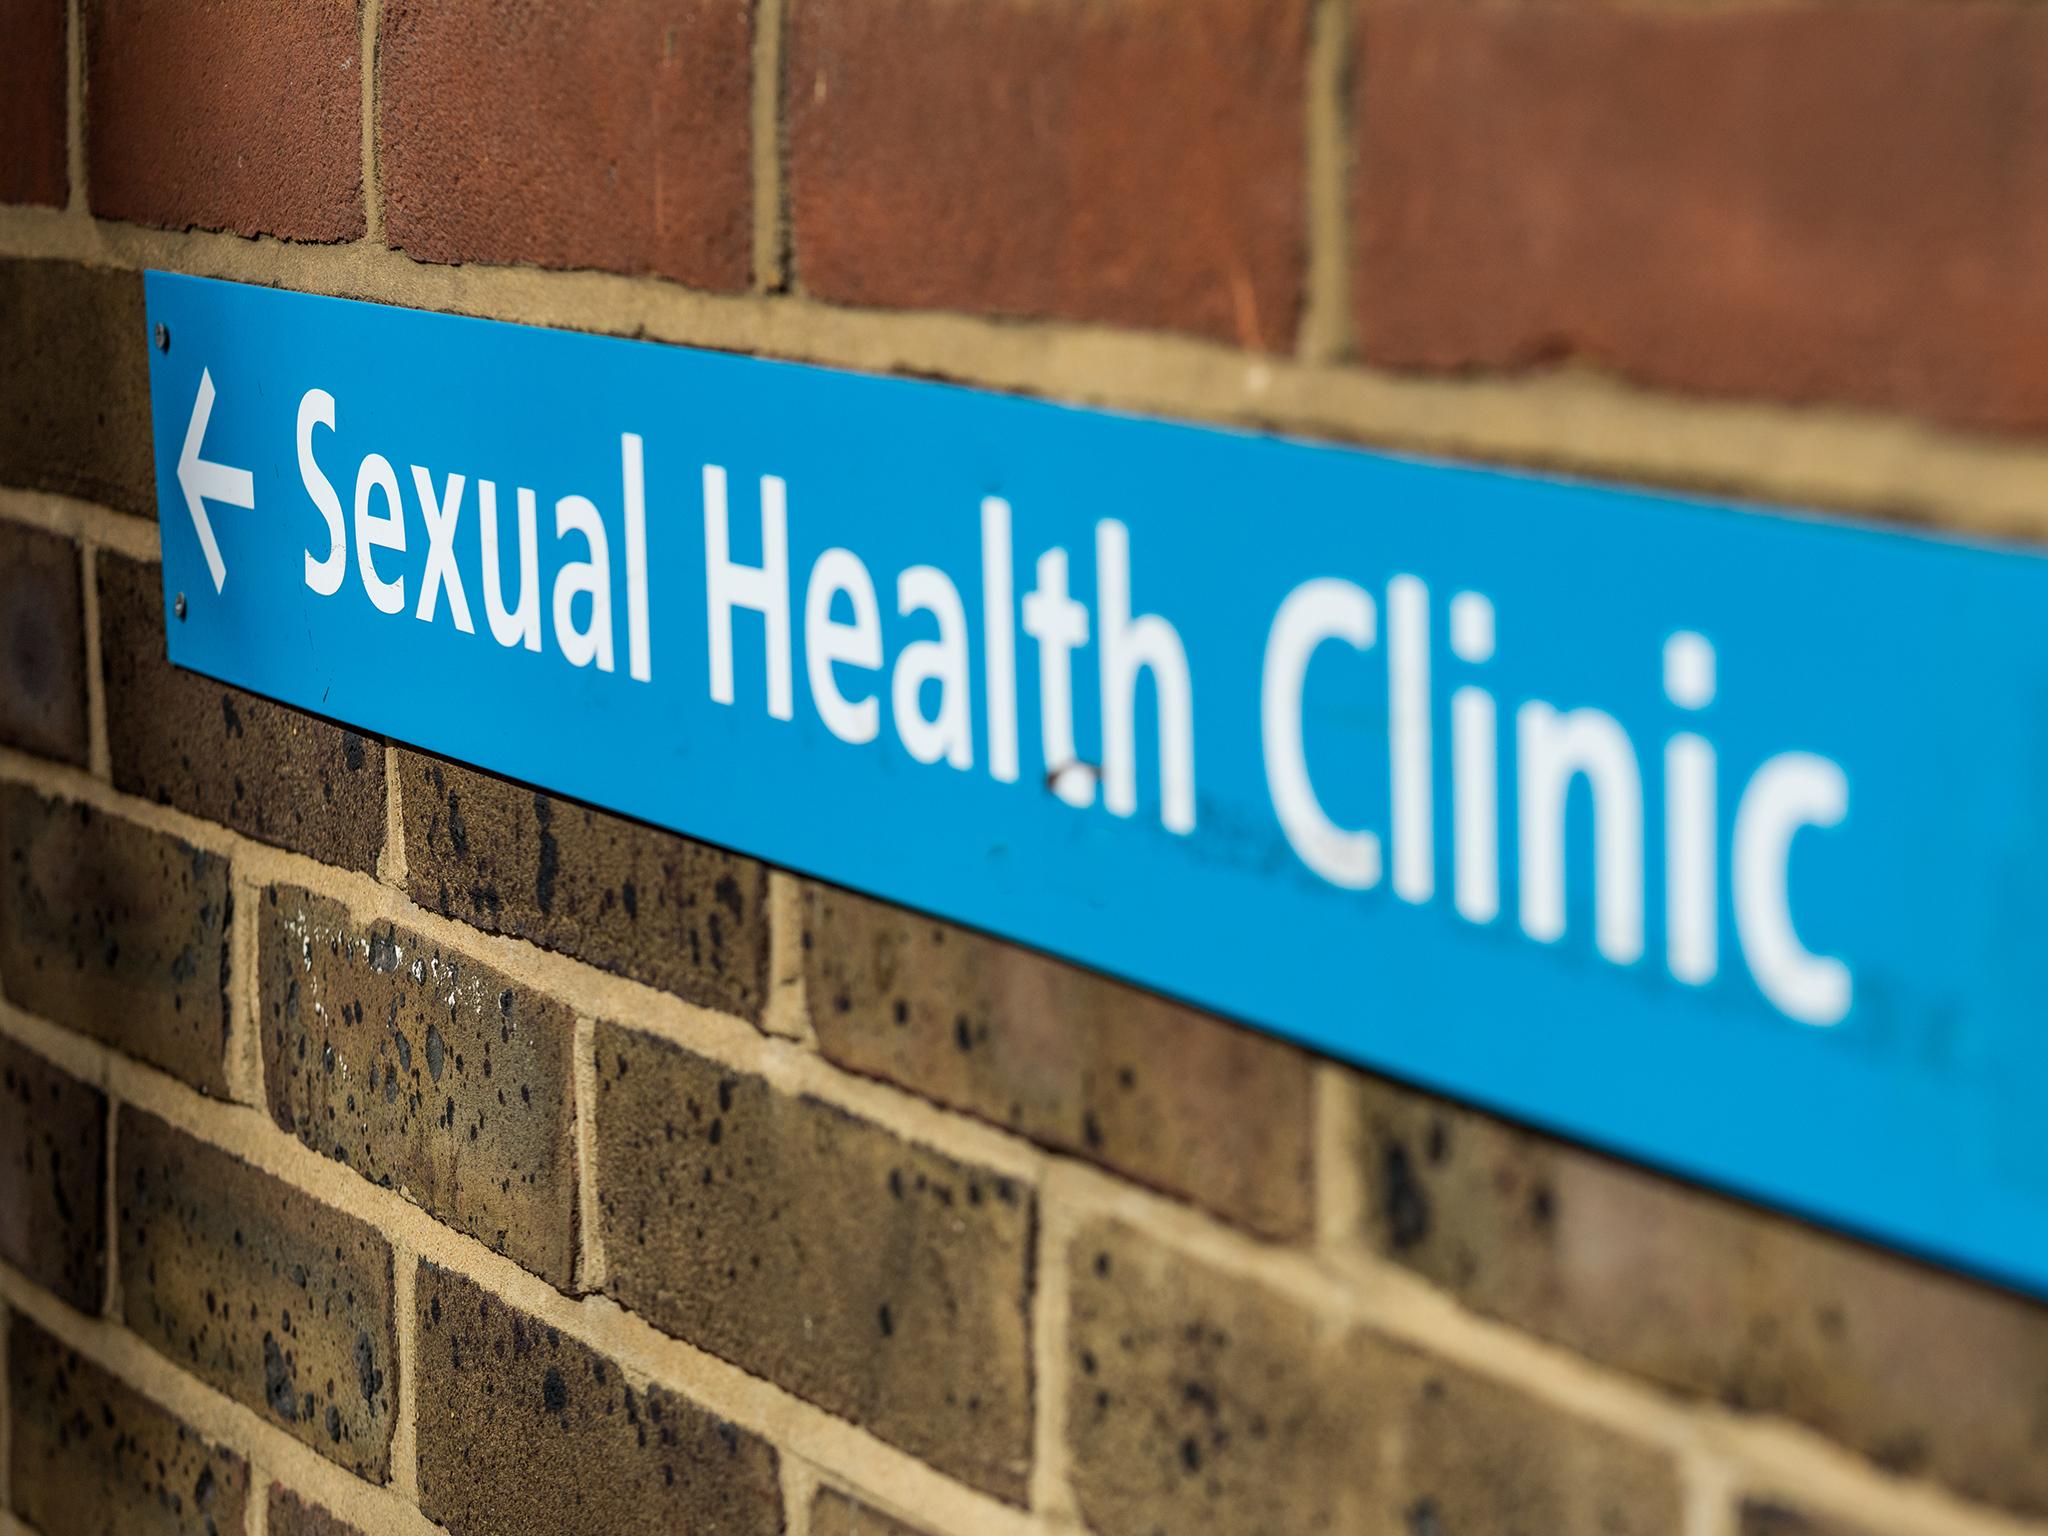 Stigma around STIs has prevented people from being screened and treated